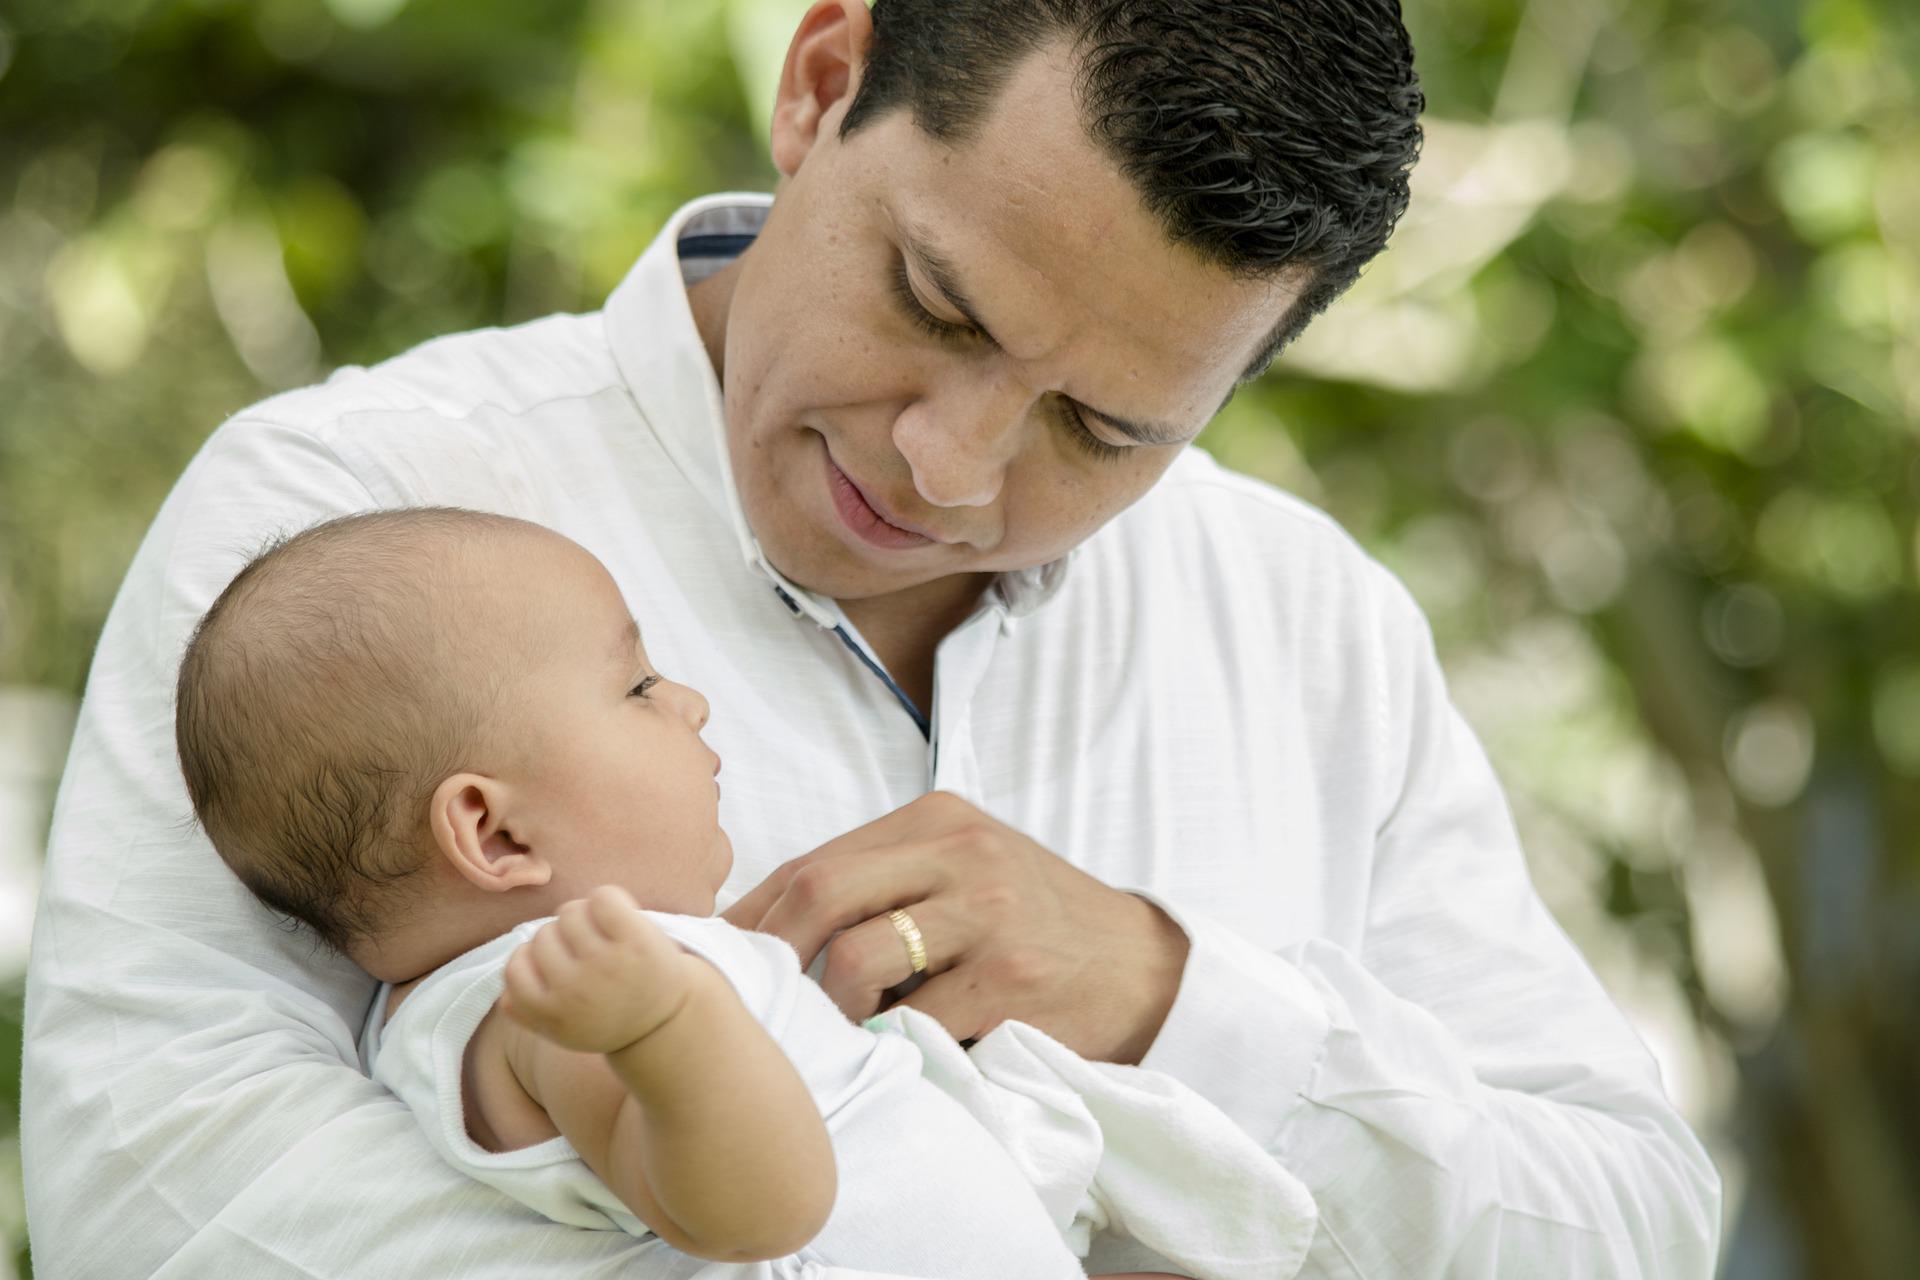 a father holding his child representing the benefit of Term life insurance for families